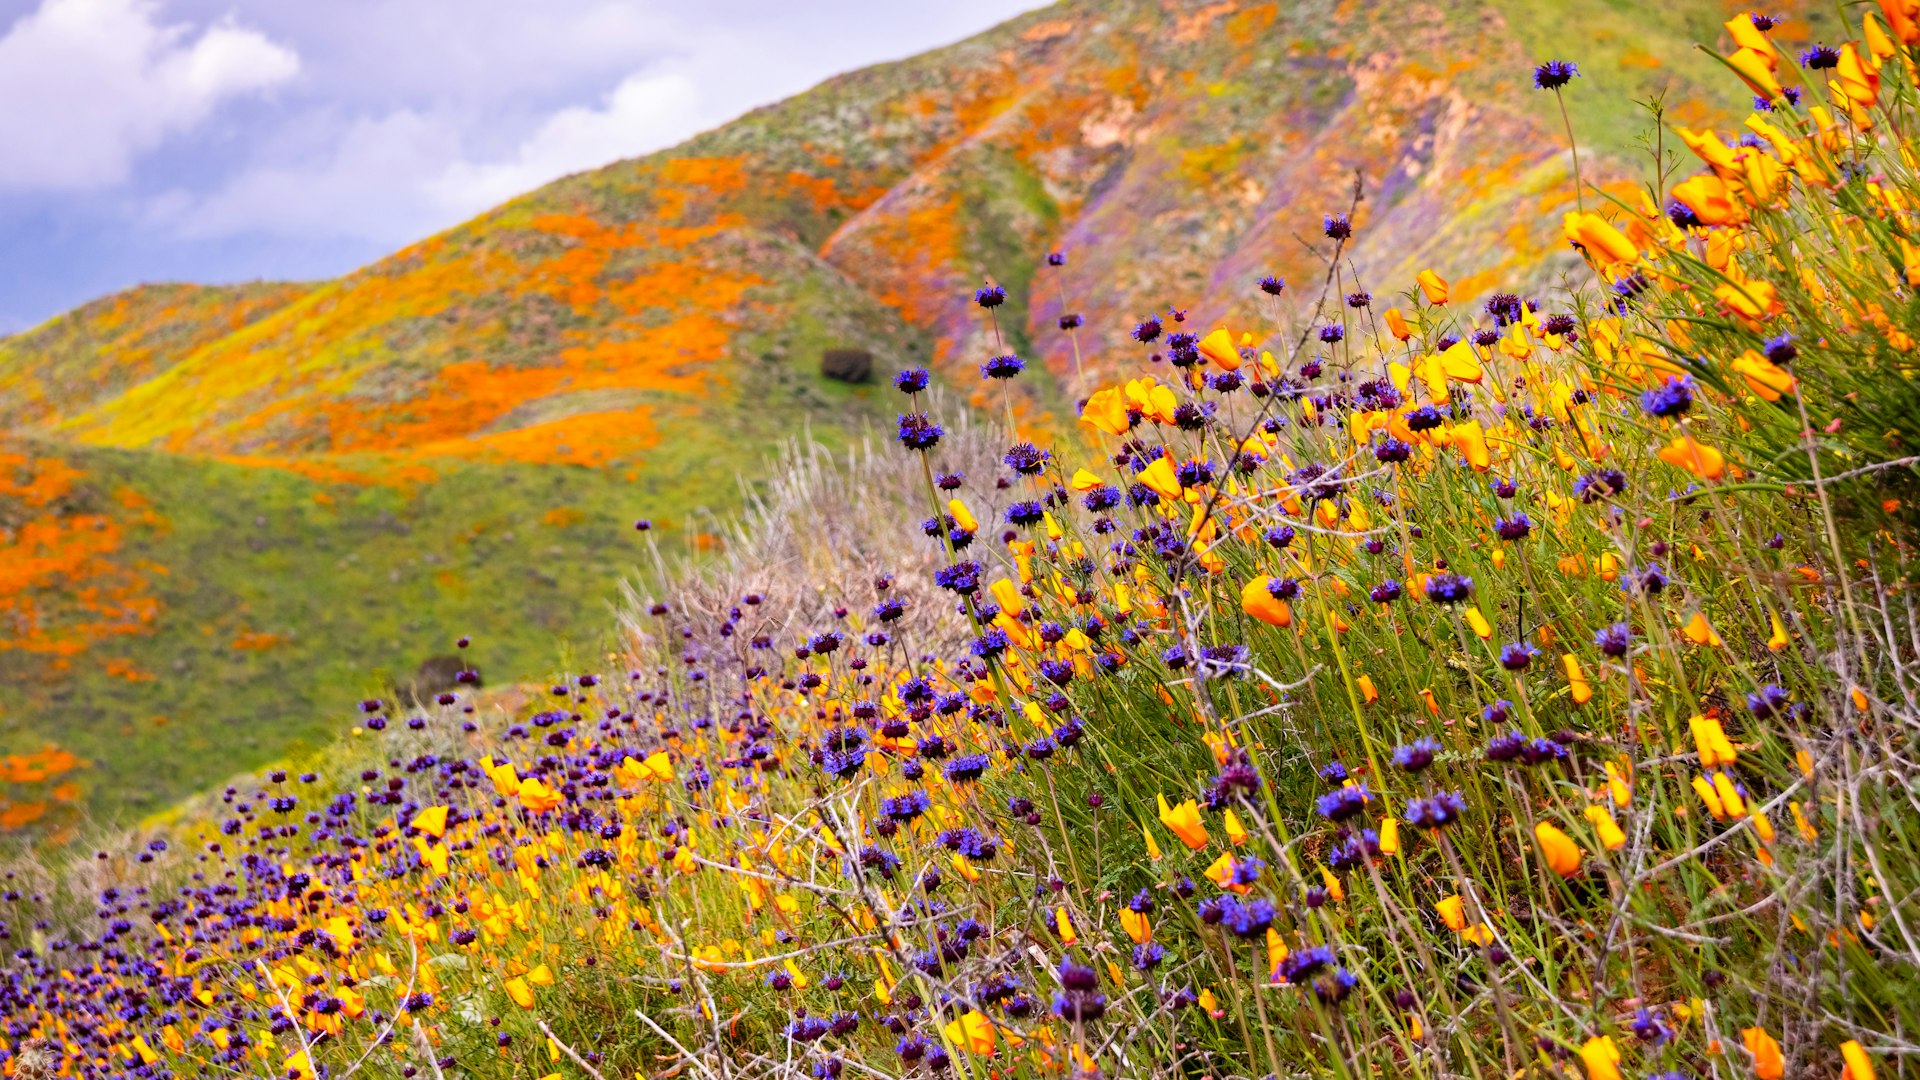 California poppies (Eschscholzia californica) and Chia (Salvia hispanica) blooming on the hills of Walker Canyon during the superbloom